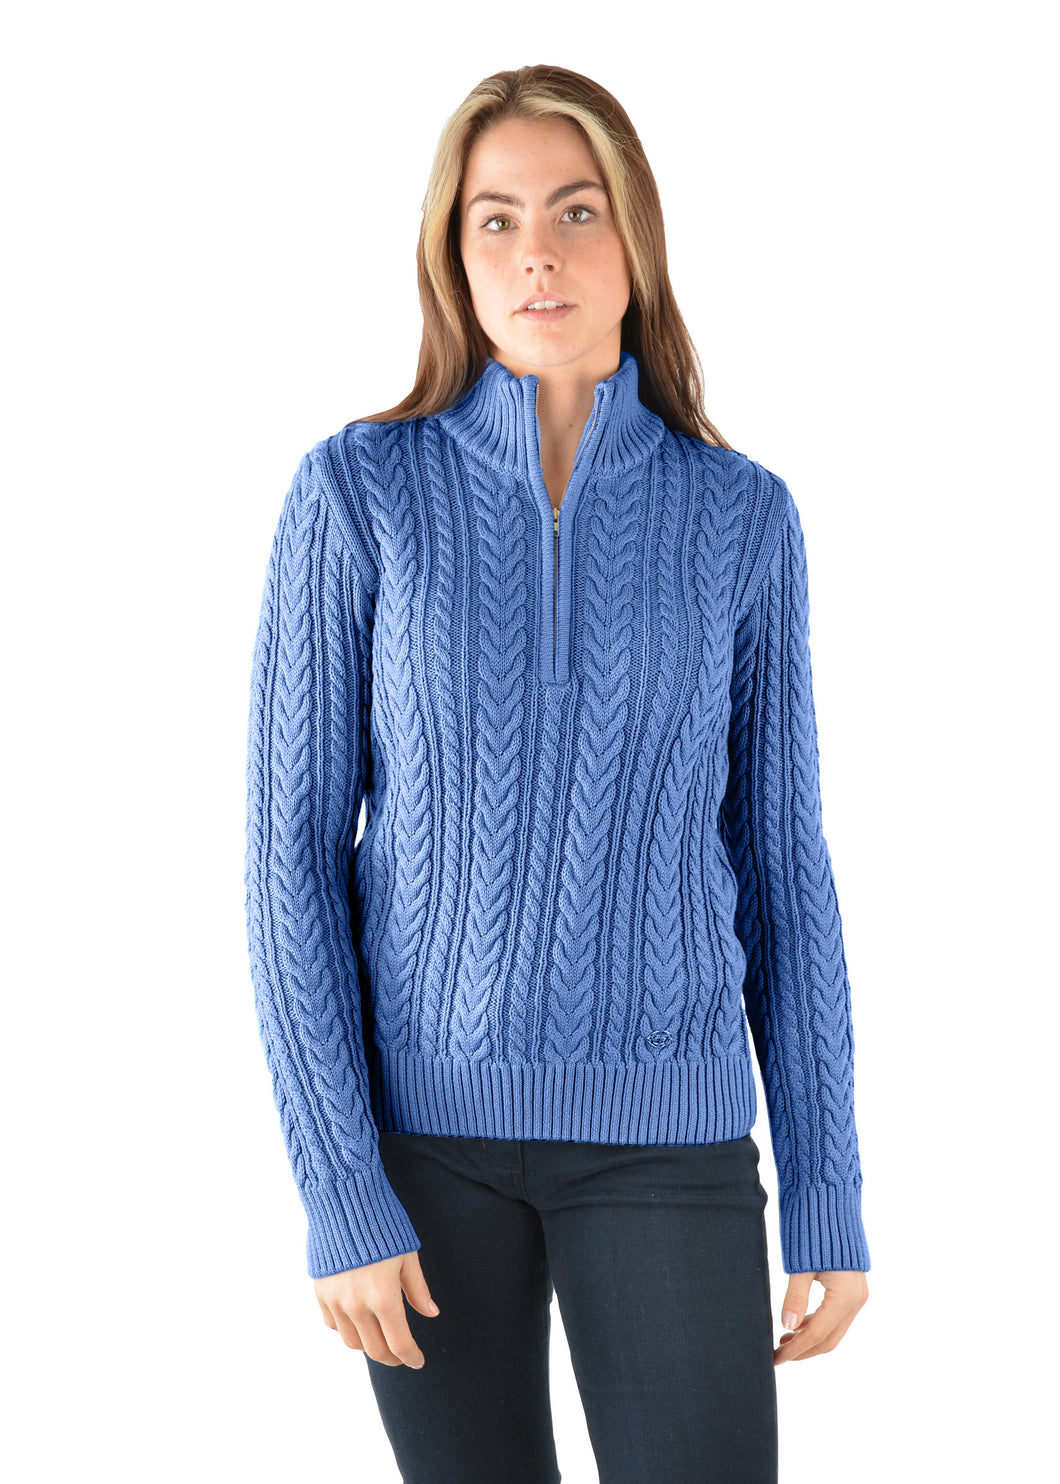 WOMENS CABLE QUARTER ZIP KNIT RUGBY